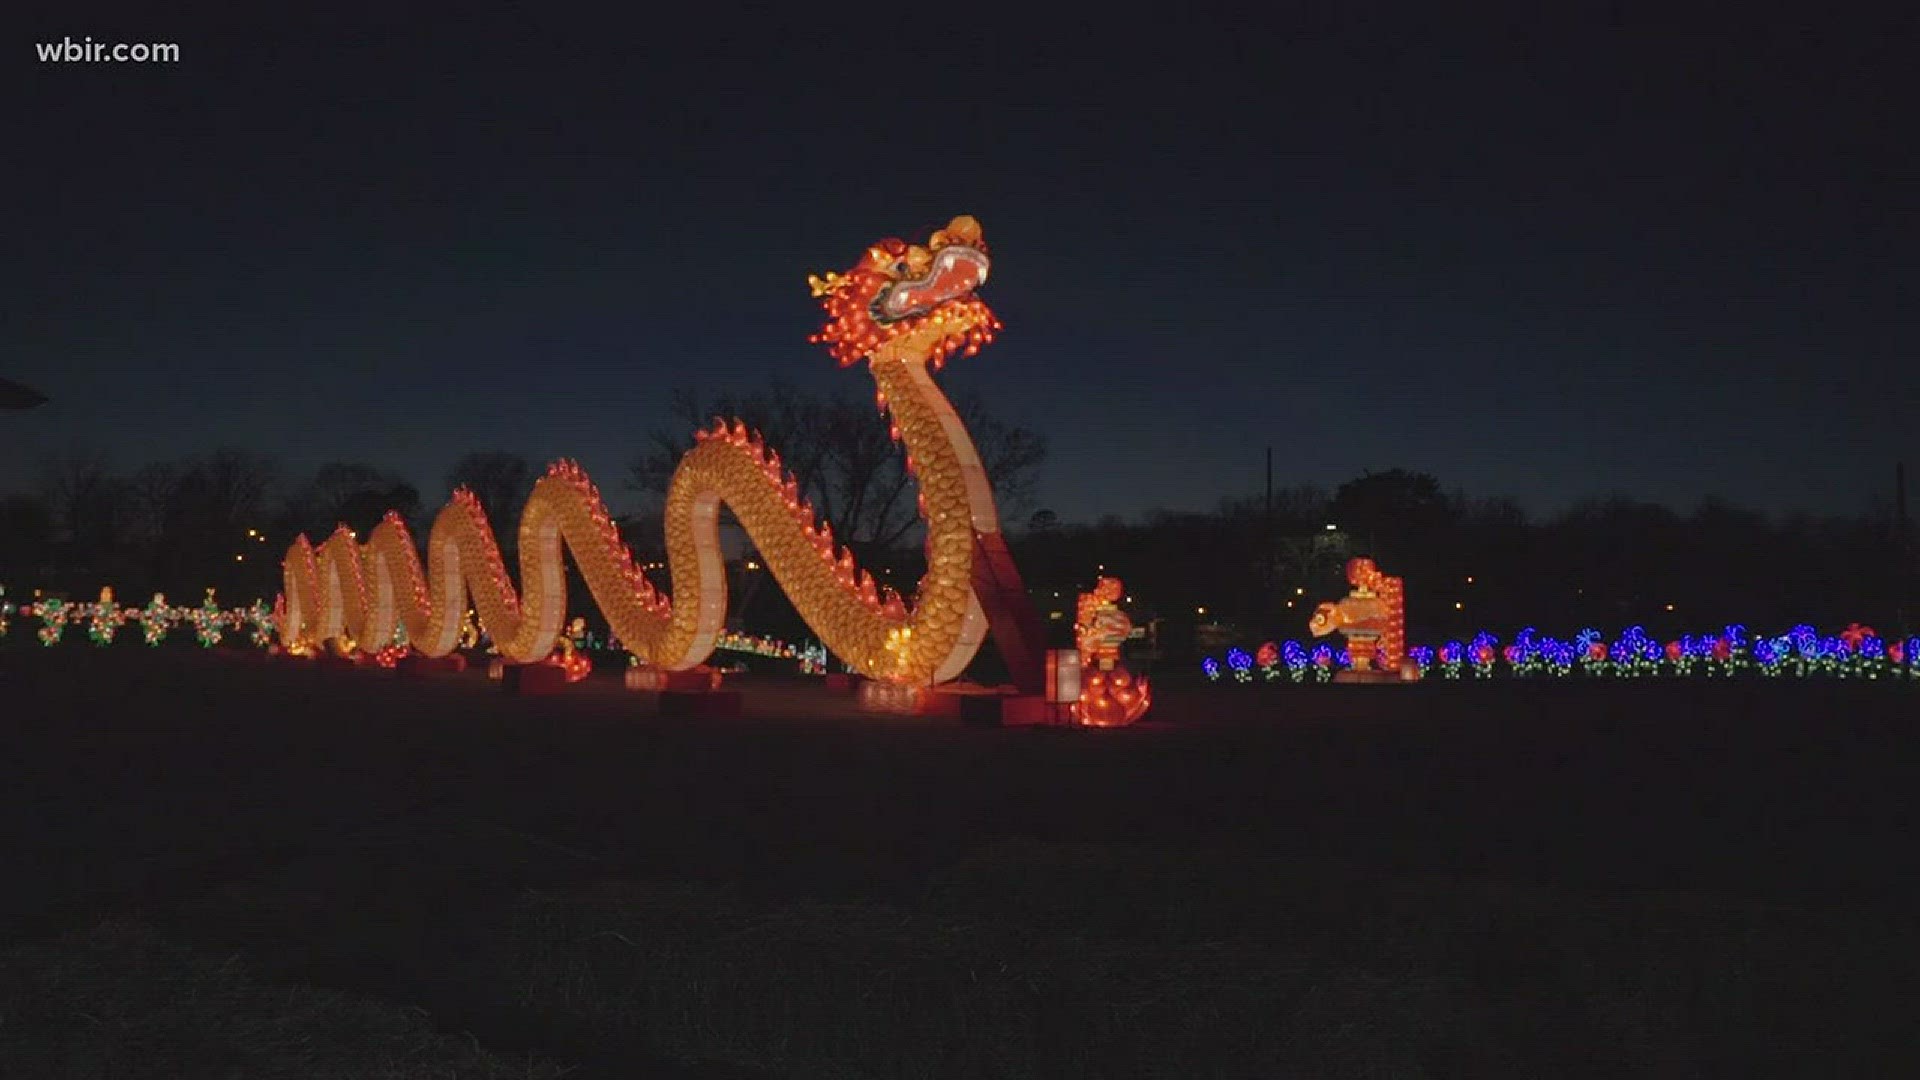 The event will feature elaborate Chinese lantern displays.